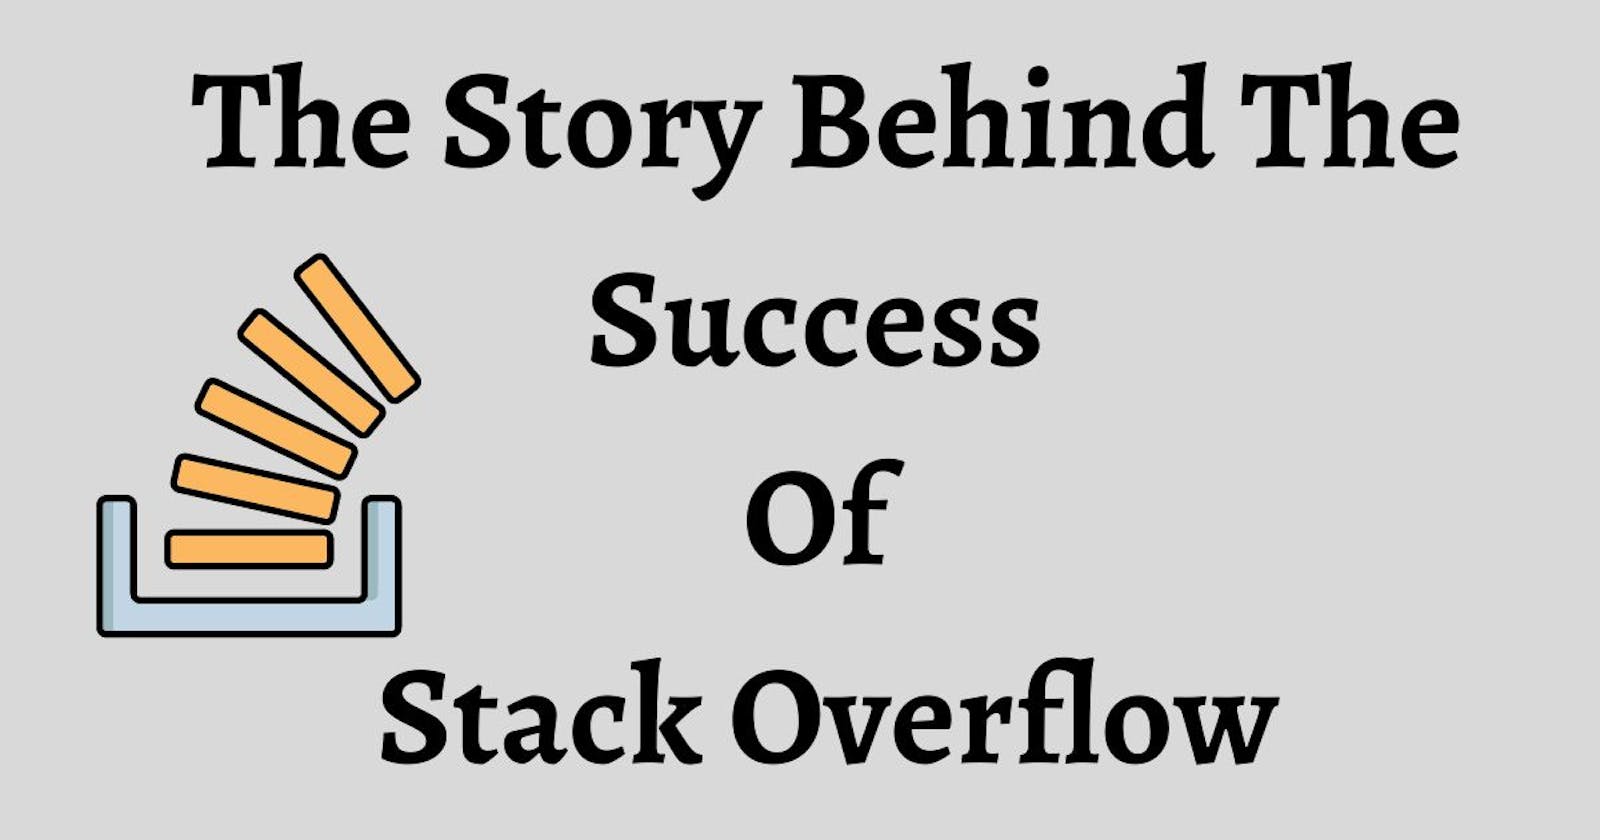 The Story Behind The Success Of StackOverflow